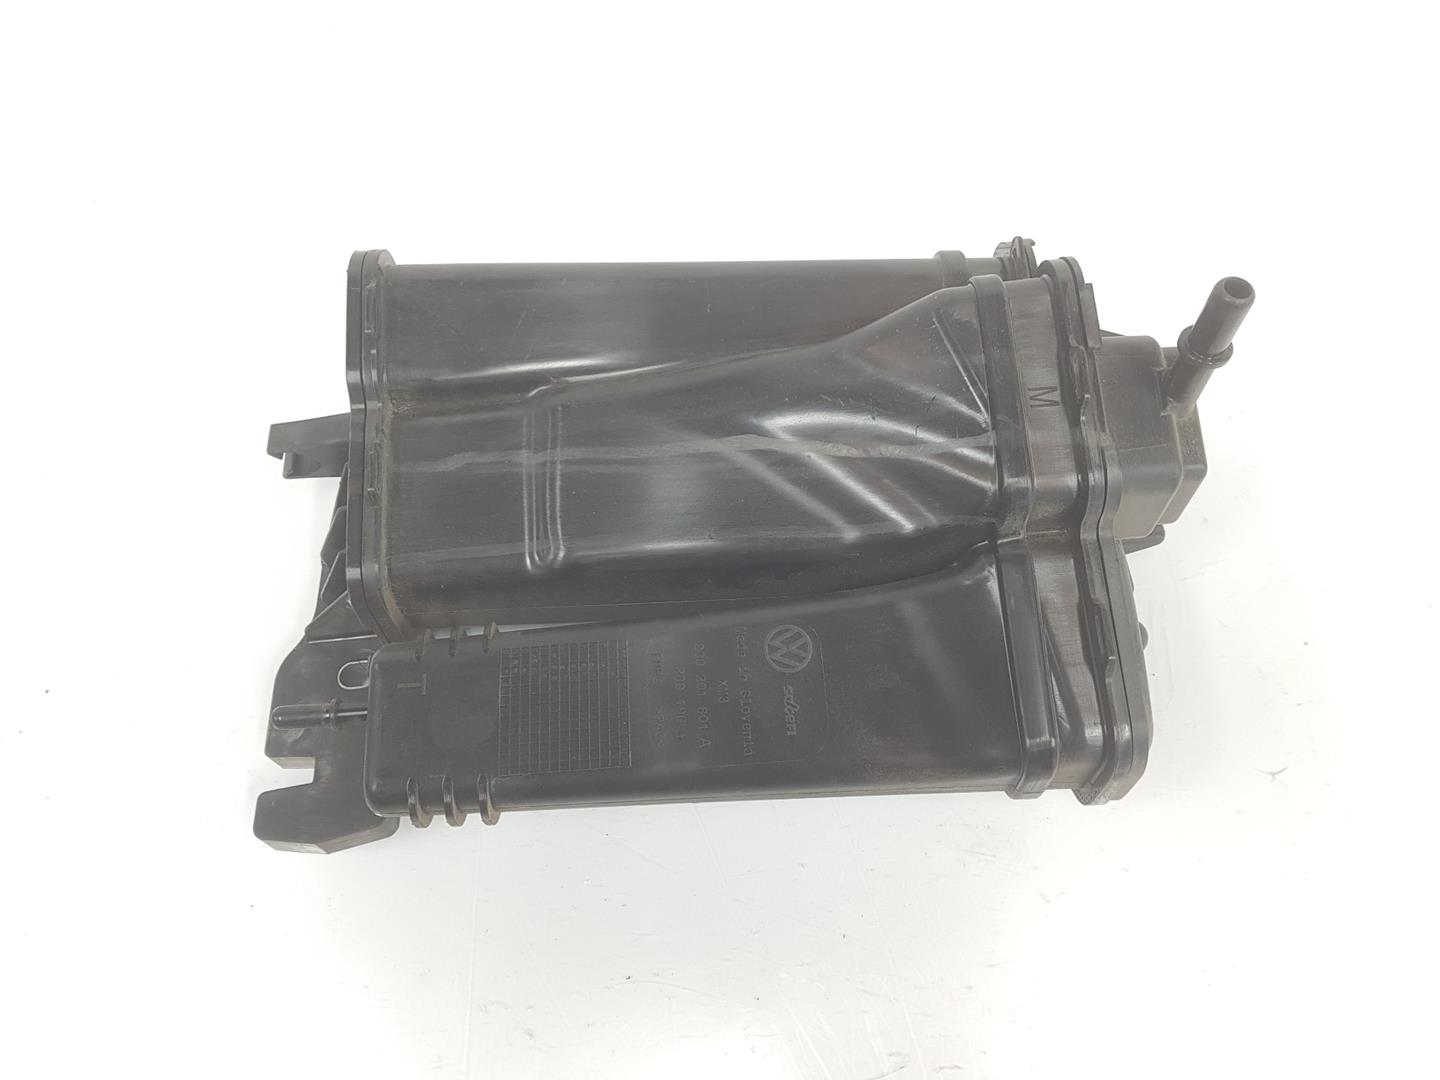 SEAT Alhambra 2 generation (2010-2021) Other Engine Compartment Parts 2Q0201801A, 2Q0201801A 20441751